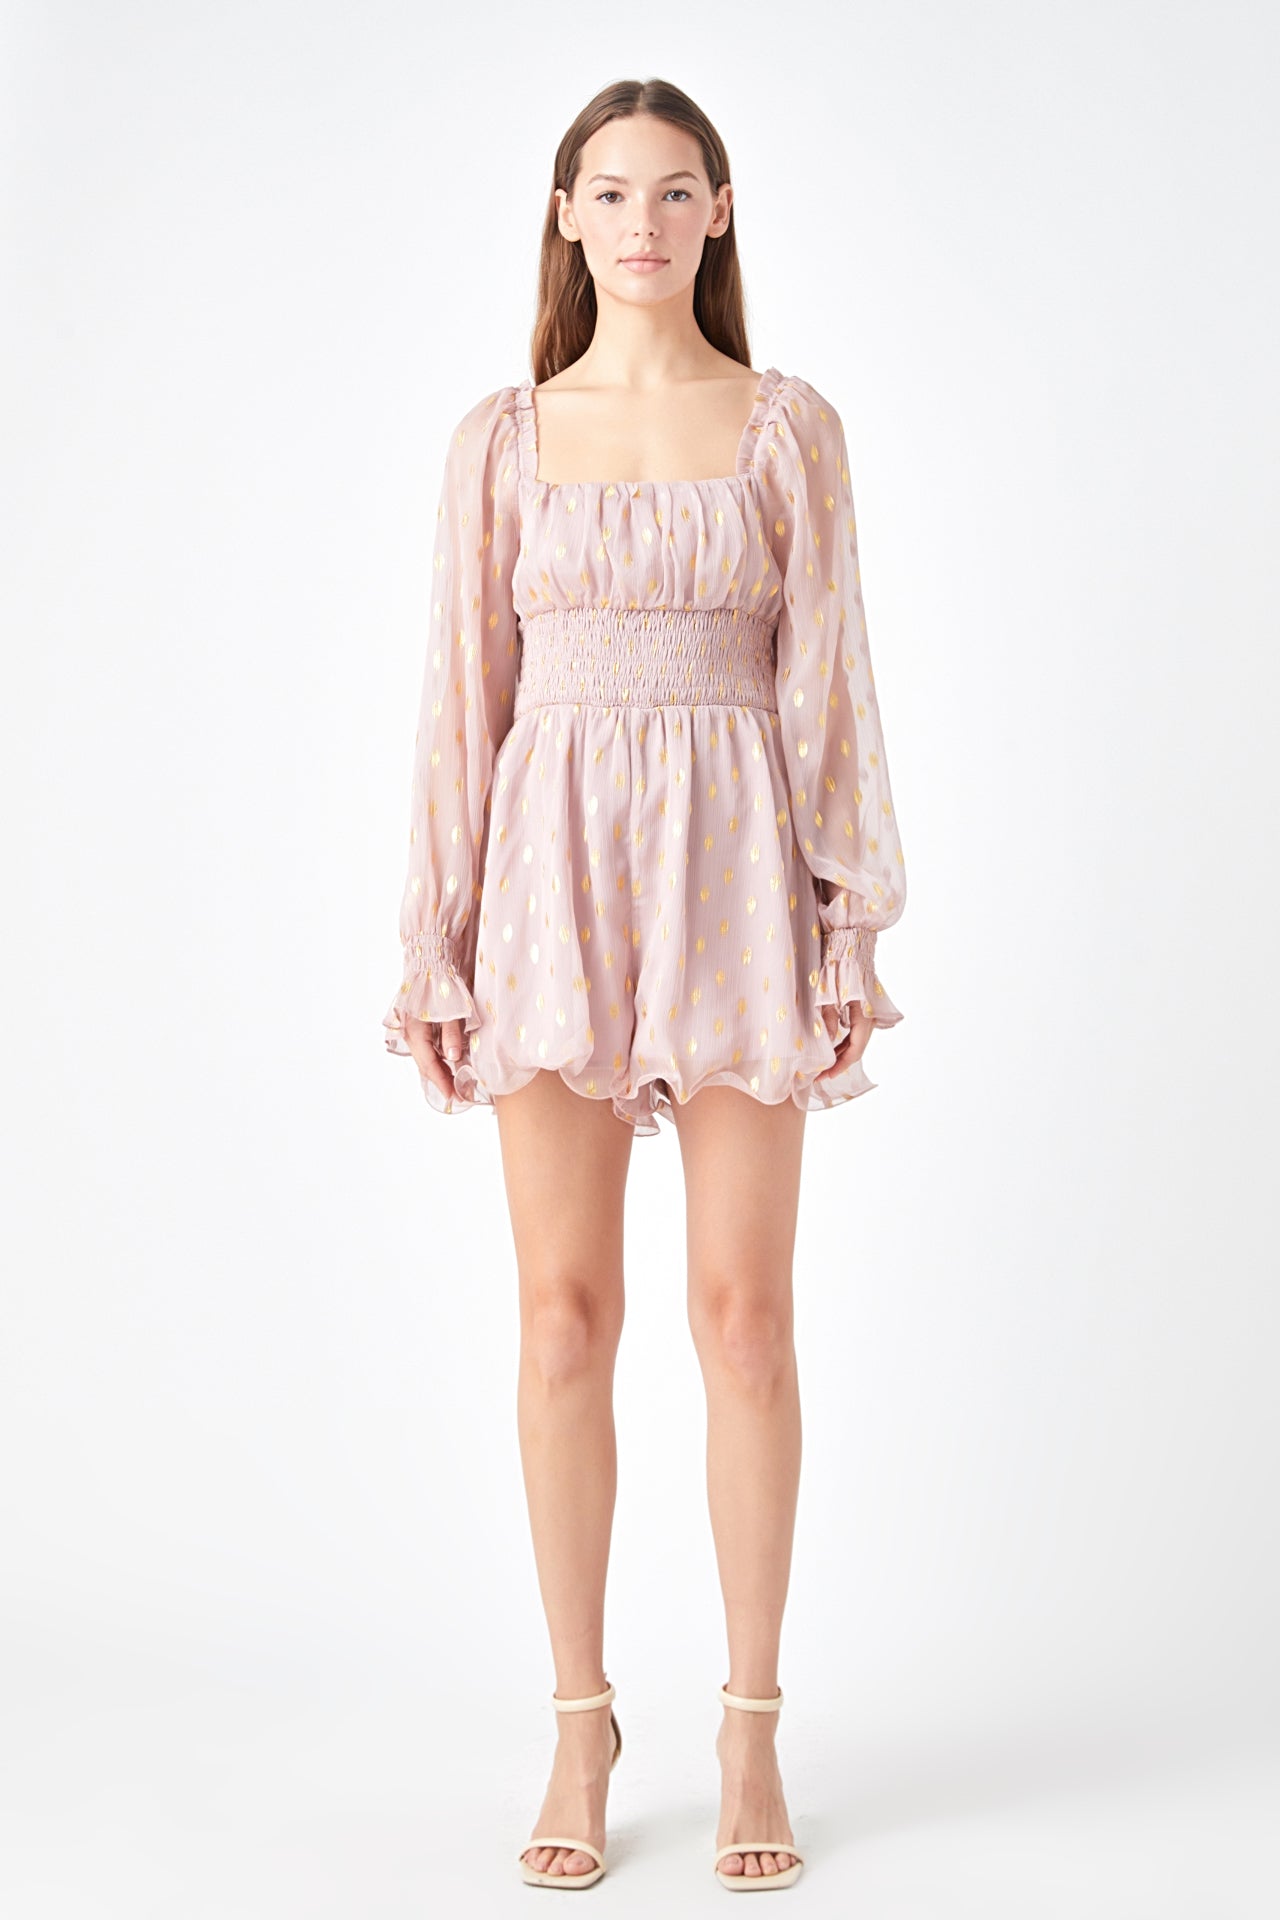 Endless Rose - Foiled Dot Long Sleeves Romper - Rompers in Women's Clothing available at endlessrose.com